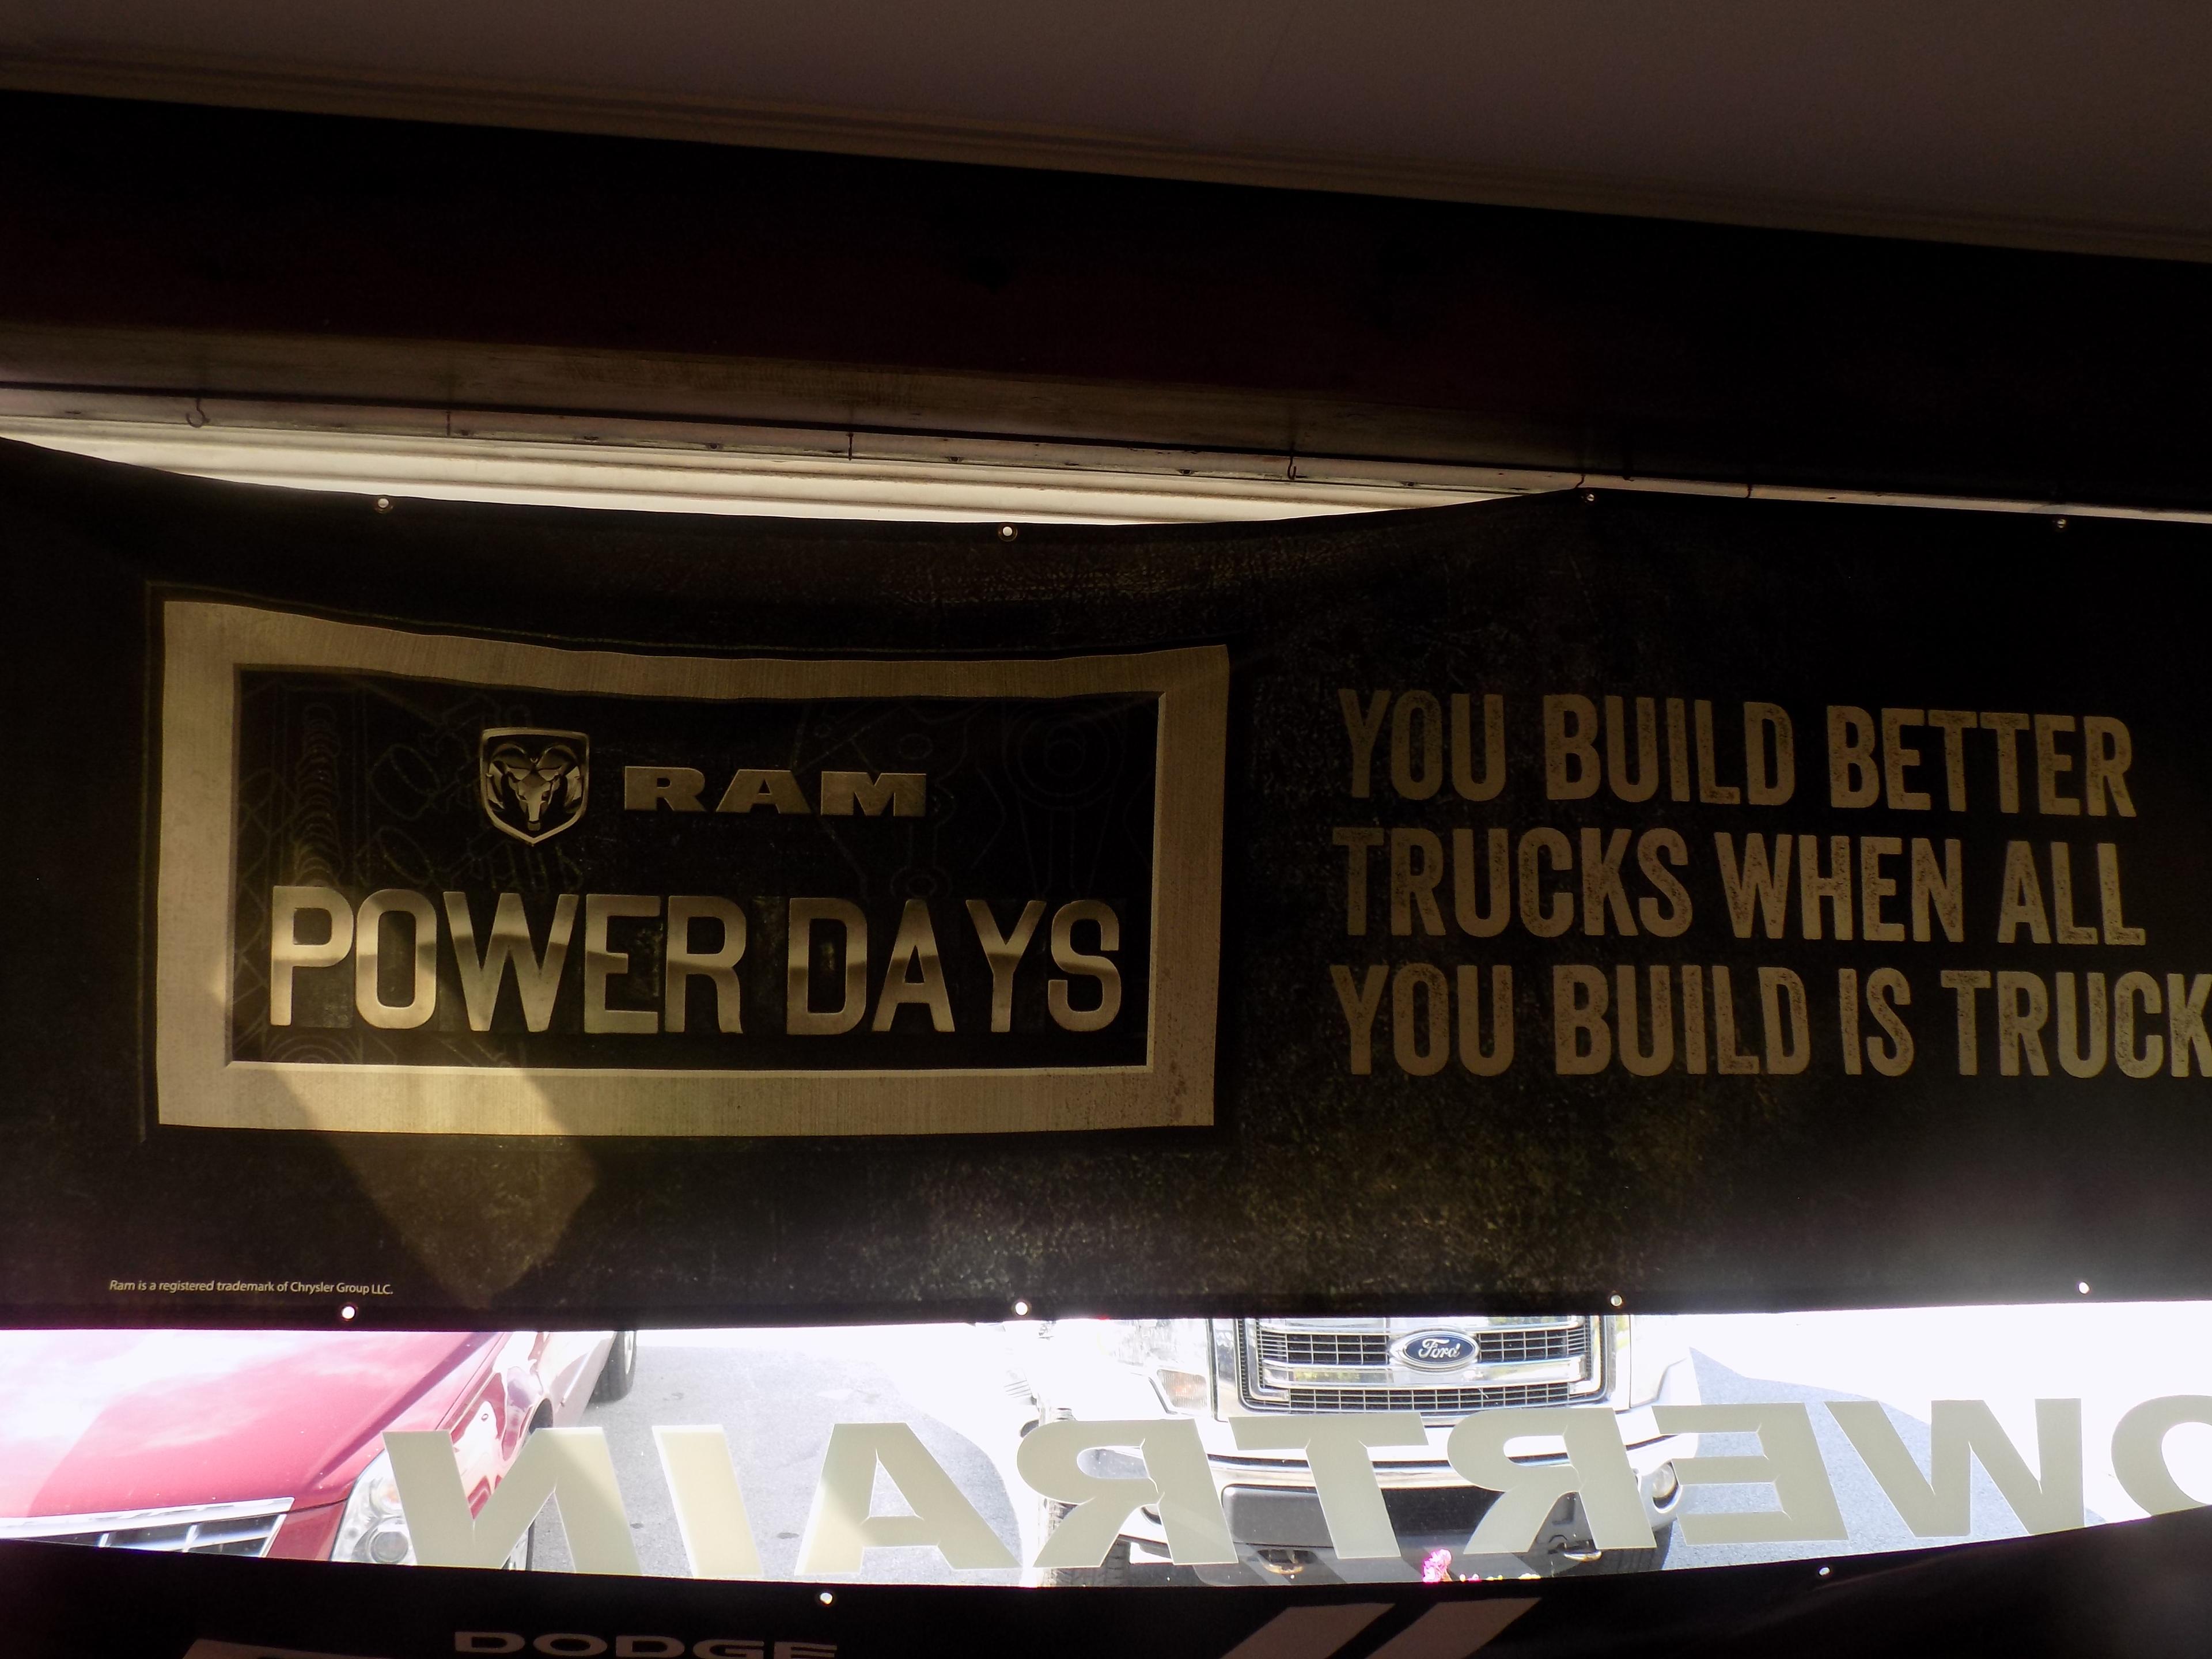 ''Ram Power Days'' - You Build Better Trucks When All You Build is Trucks -